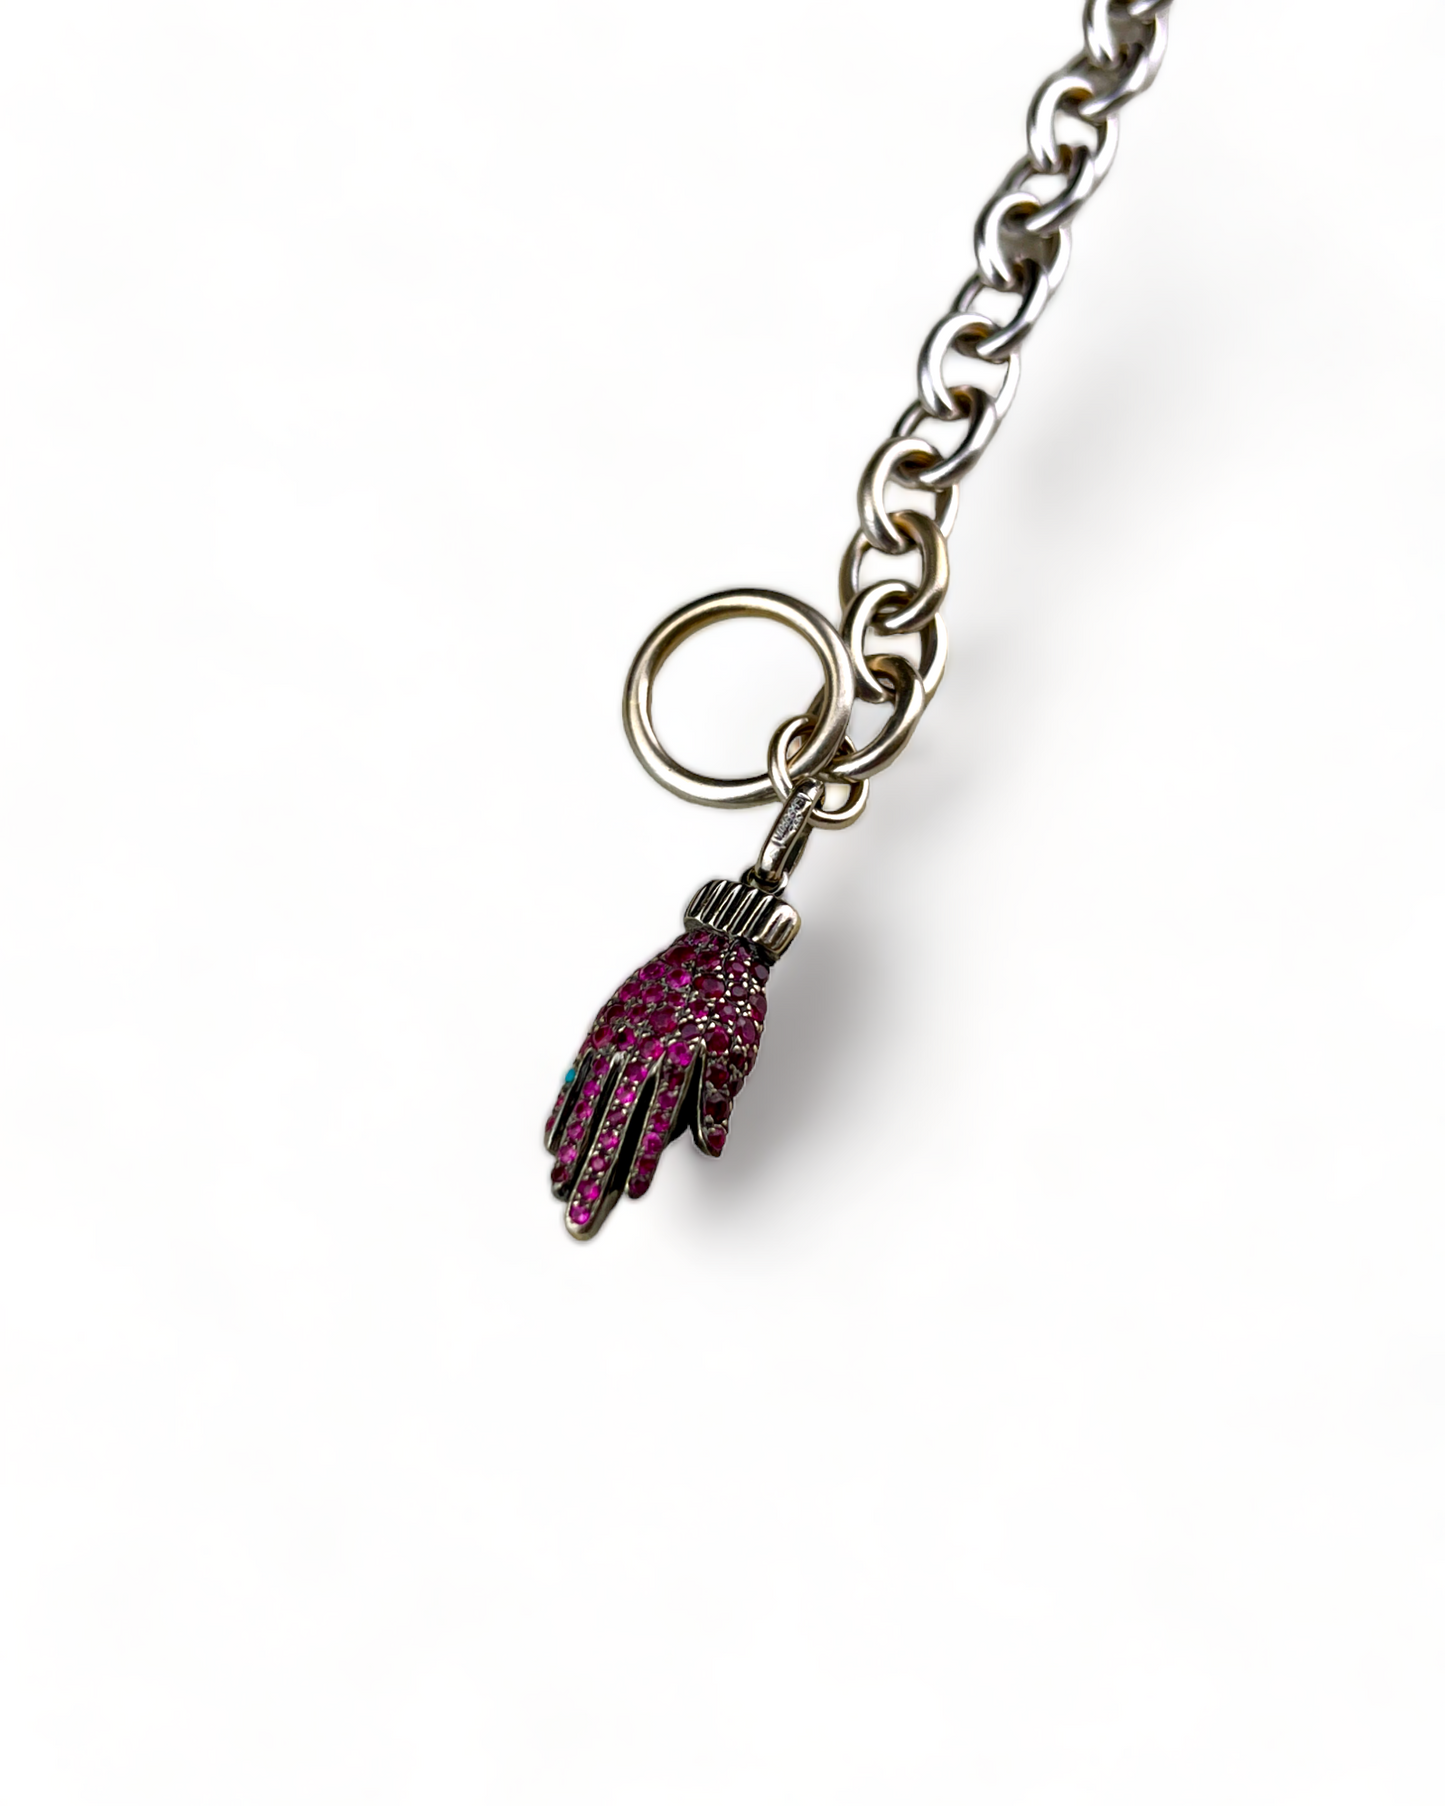 White Gold Bracelet with Rubies